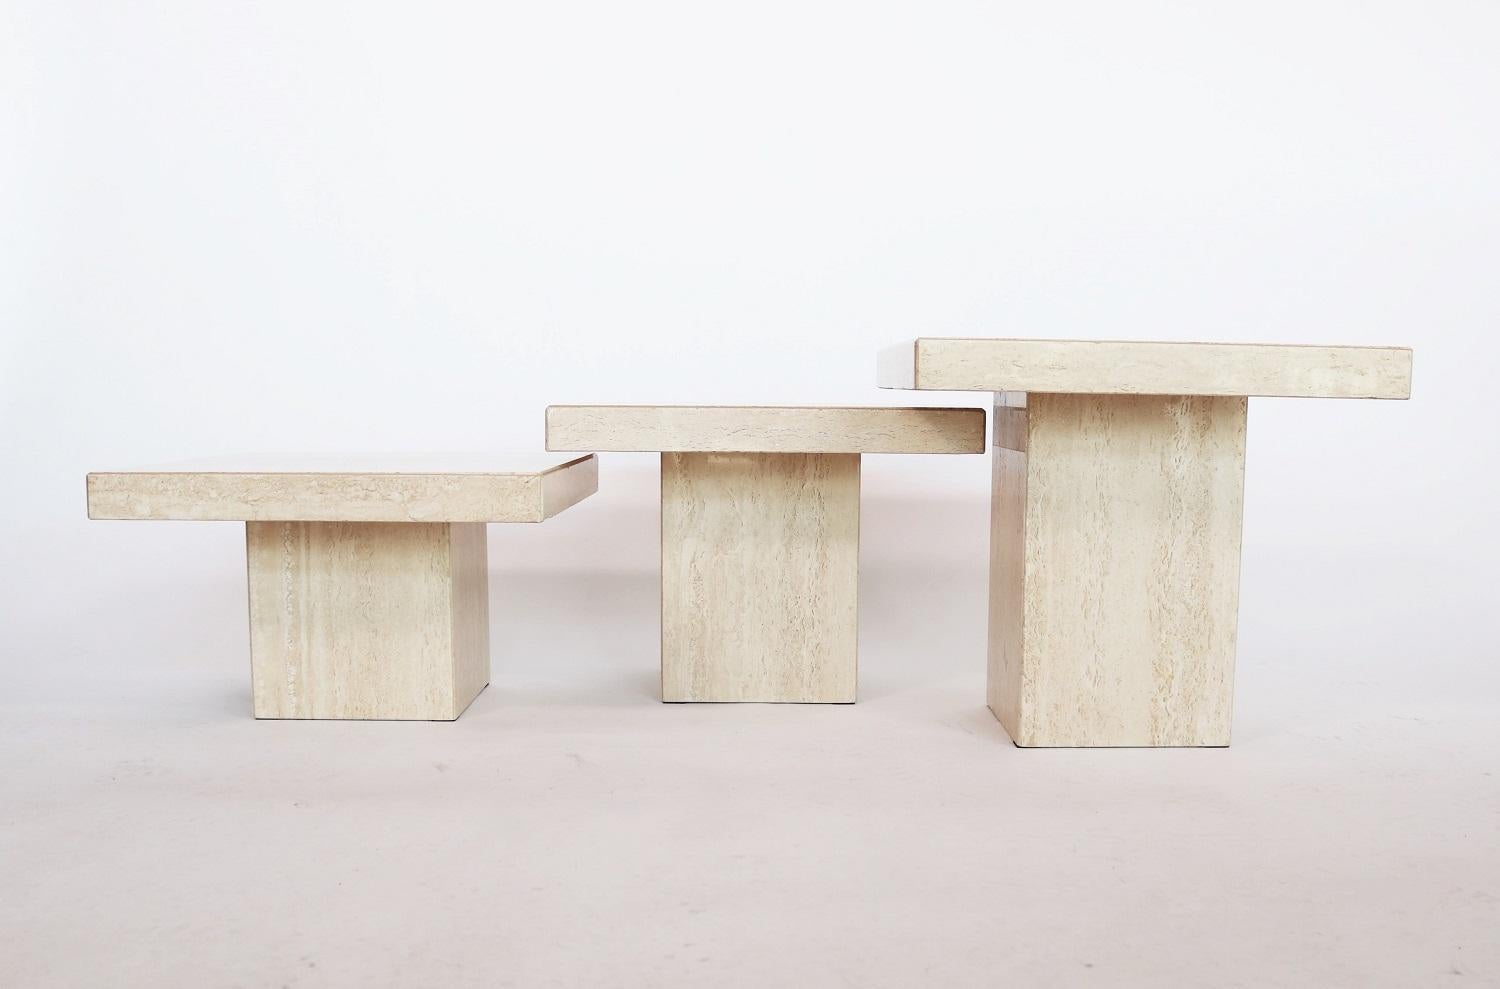 Hollywood Regency Italian Travertine Marble Coffee Tables from the 1970s, Set of Three